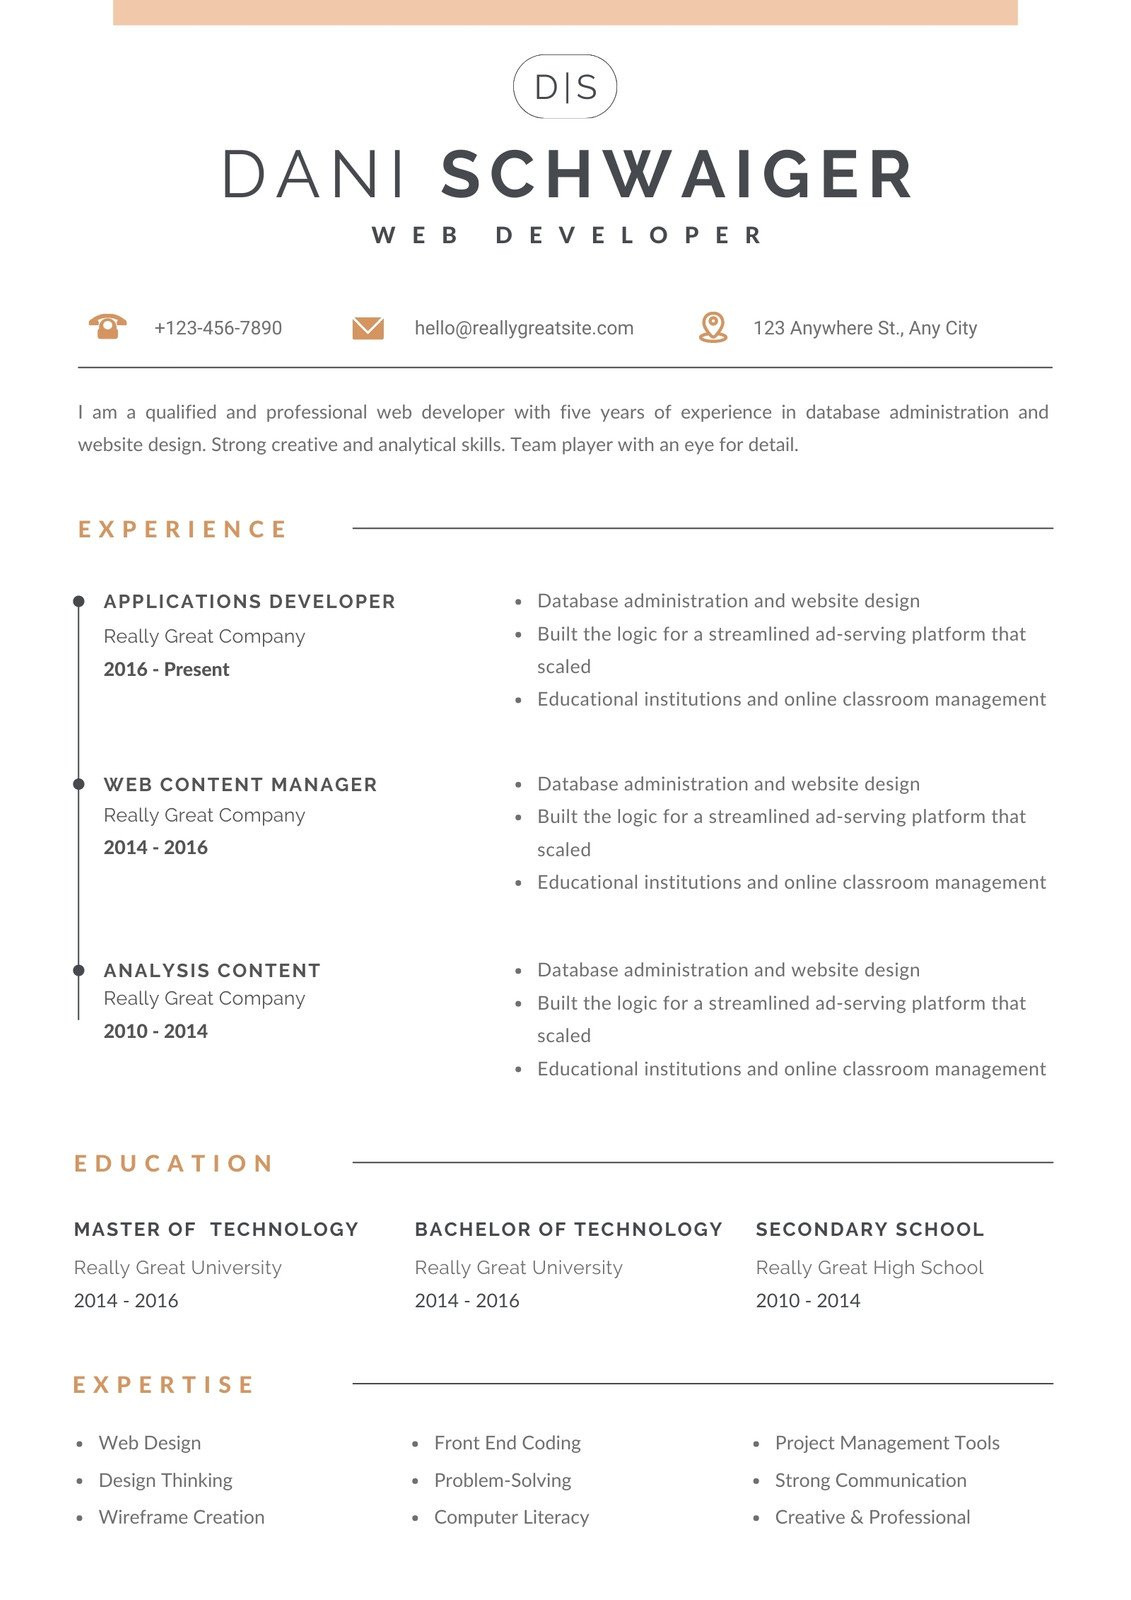 Sample High School Resume for College Applications Free Printable, Customizable College Resume Templates Canva